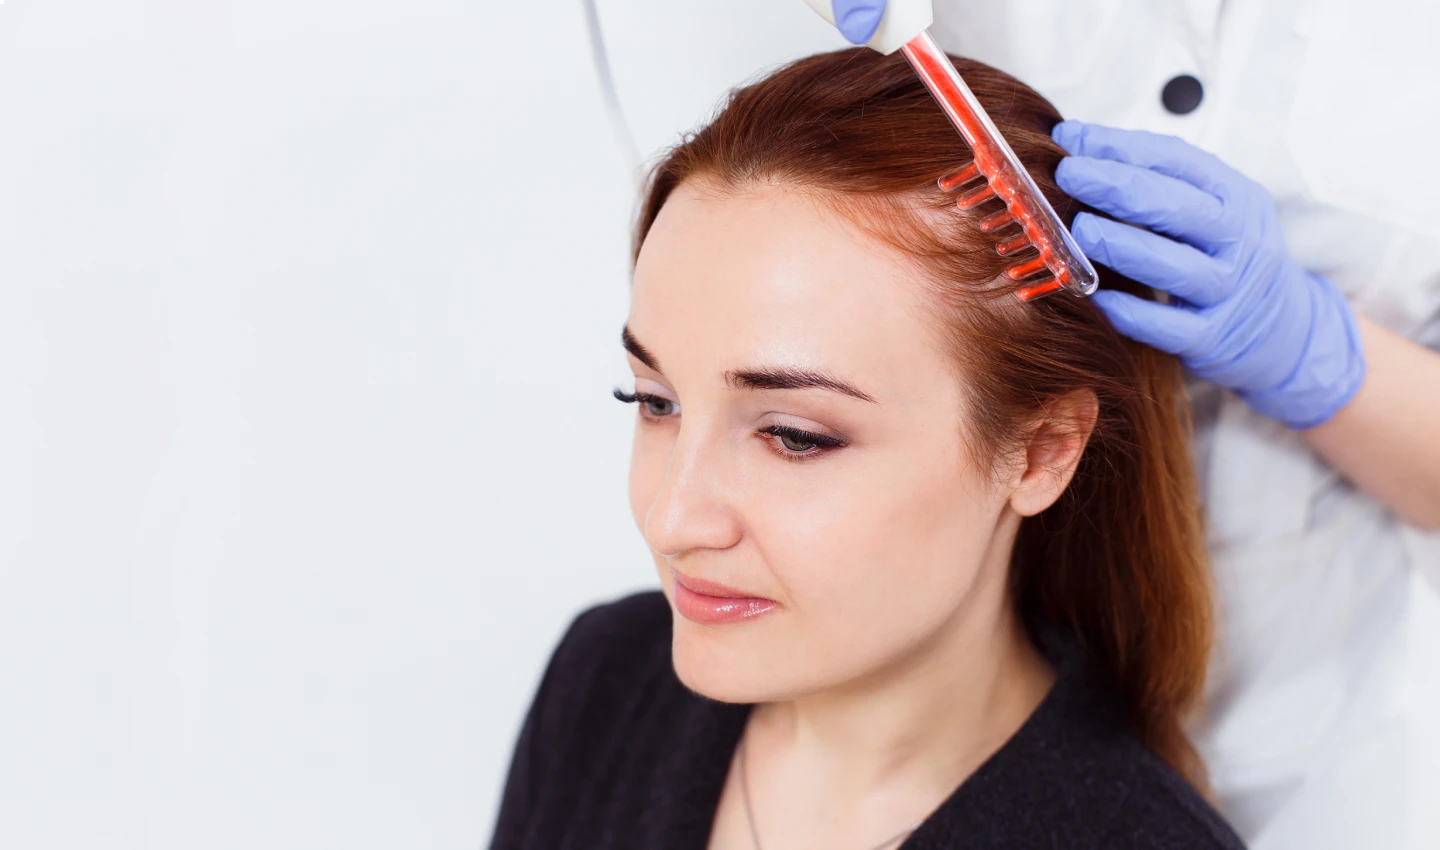 Patient receiving affordable hair restoration treatment, demonstrating cost-effective options for hair loss treatment.